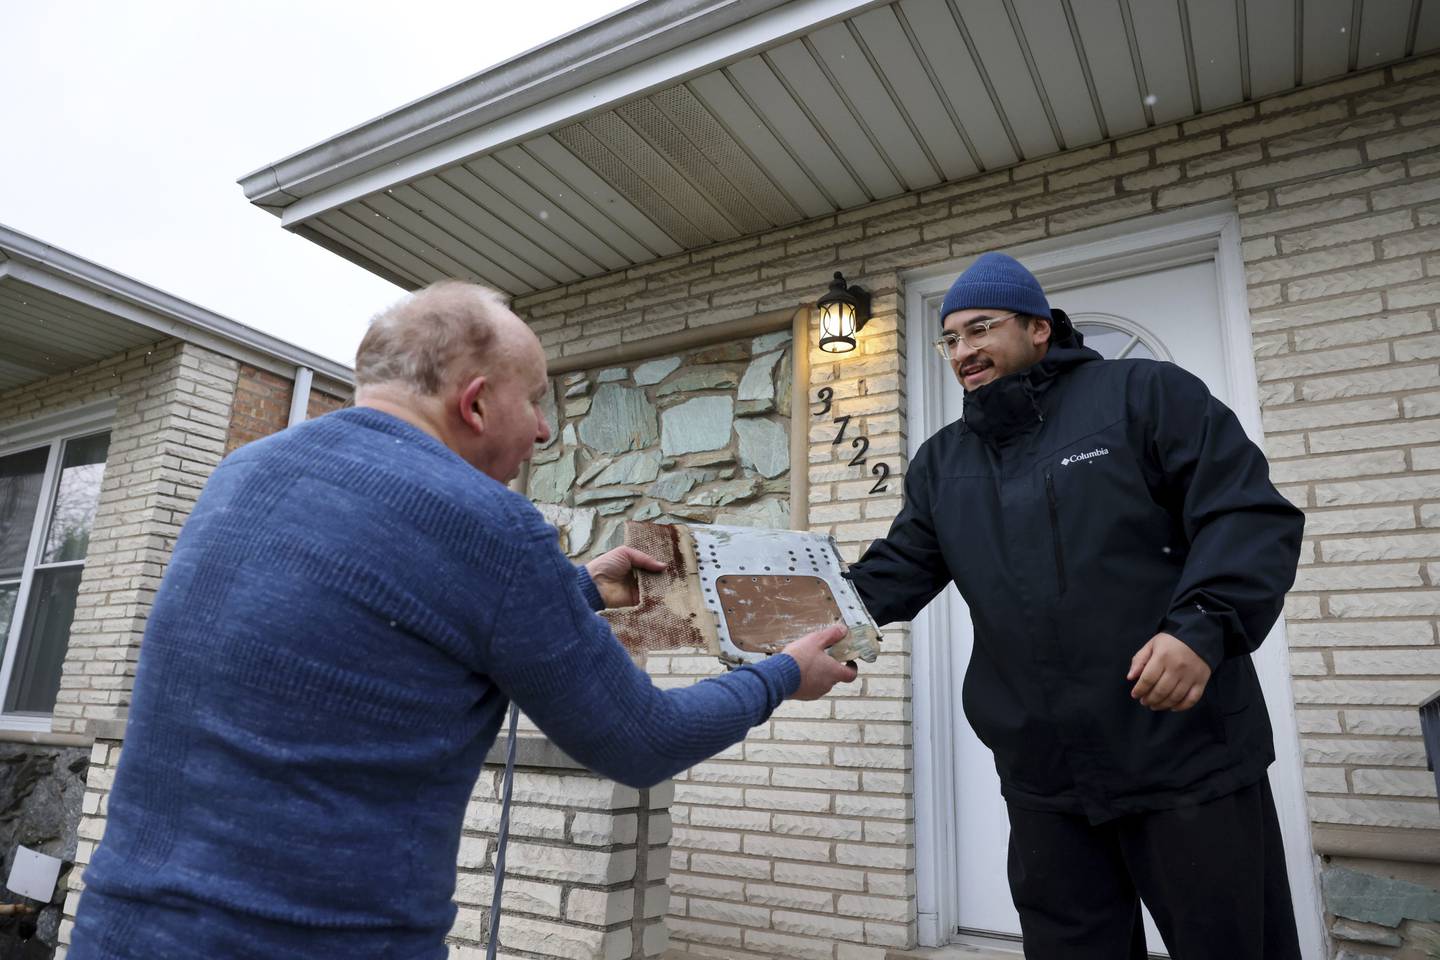 Survivor Evan Cotter Jr., left, shows neighbor Antonio Garcia, 30, a piece of the United Airlines 737 plane that crashed in Chicago’s West Lawn neighborhood on Dec. 8, 1972. Cotter was home in 1972 when the wing of a Boeing 737 slammed into the back of his family’s house. Garcia lives in the rebuilt home where the Boeing 737 crashed.